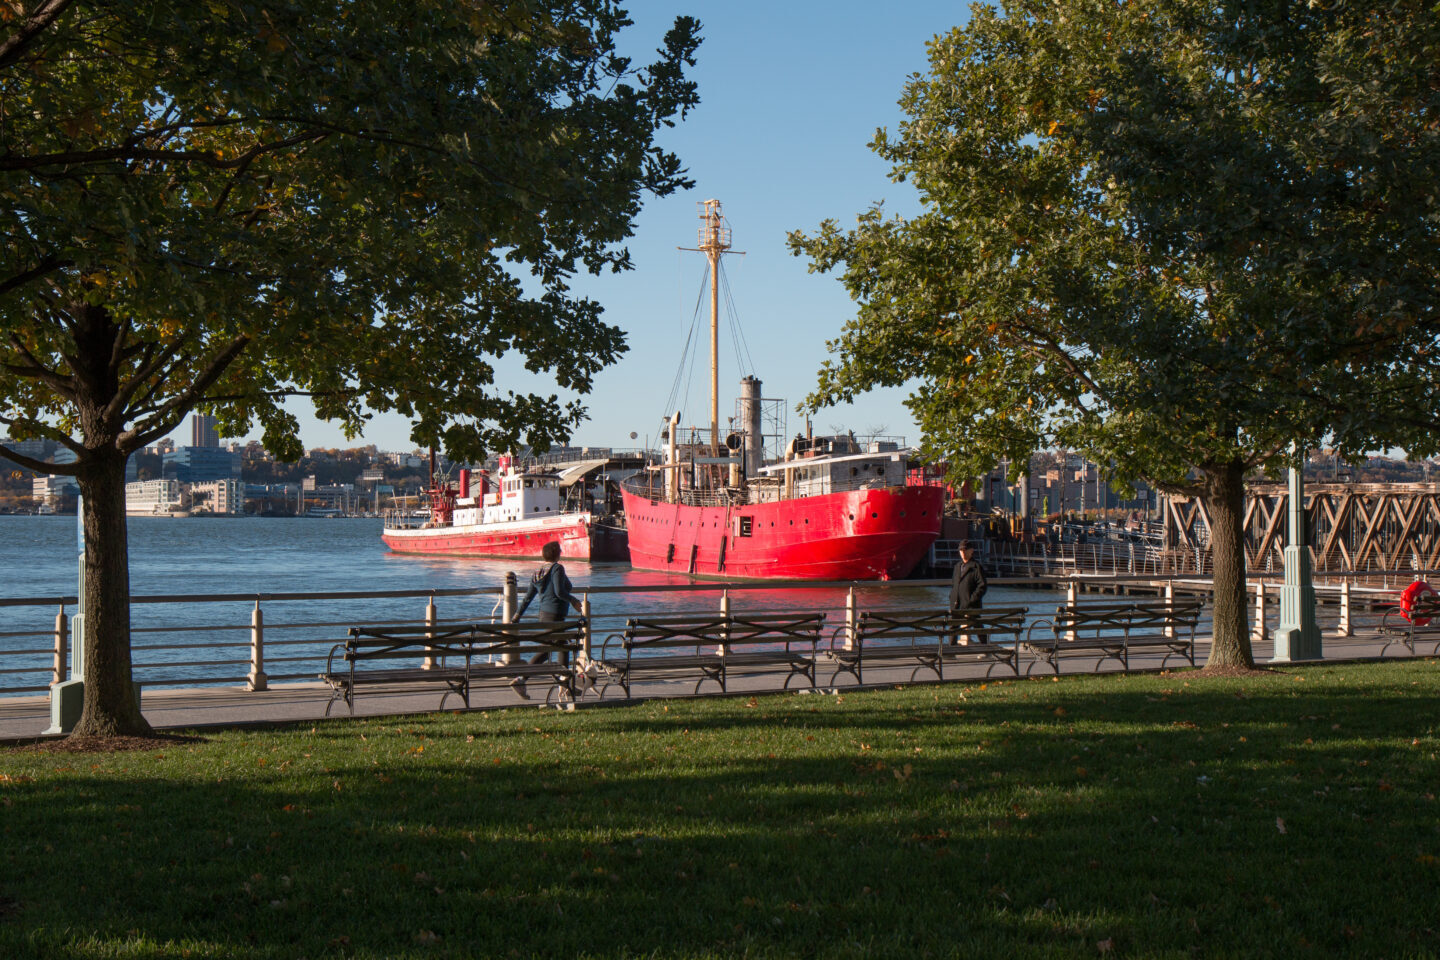 The Frying Pan, a red vessel at Pier 66a